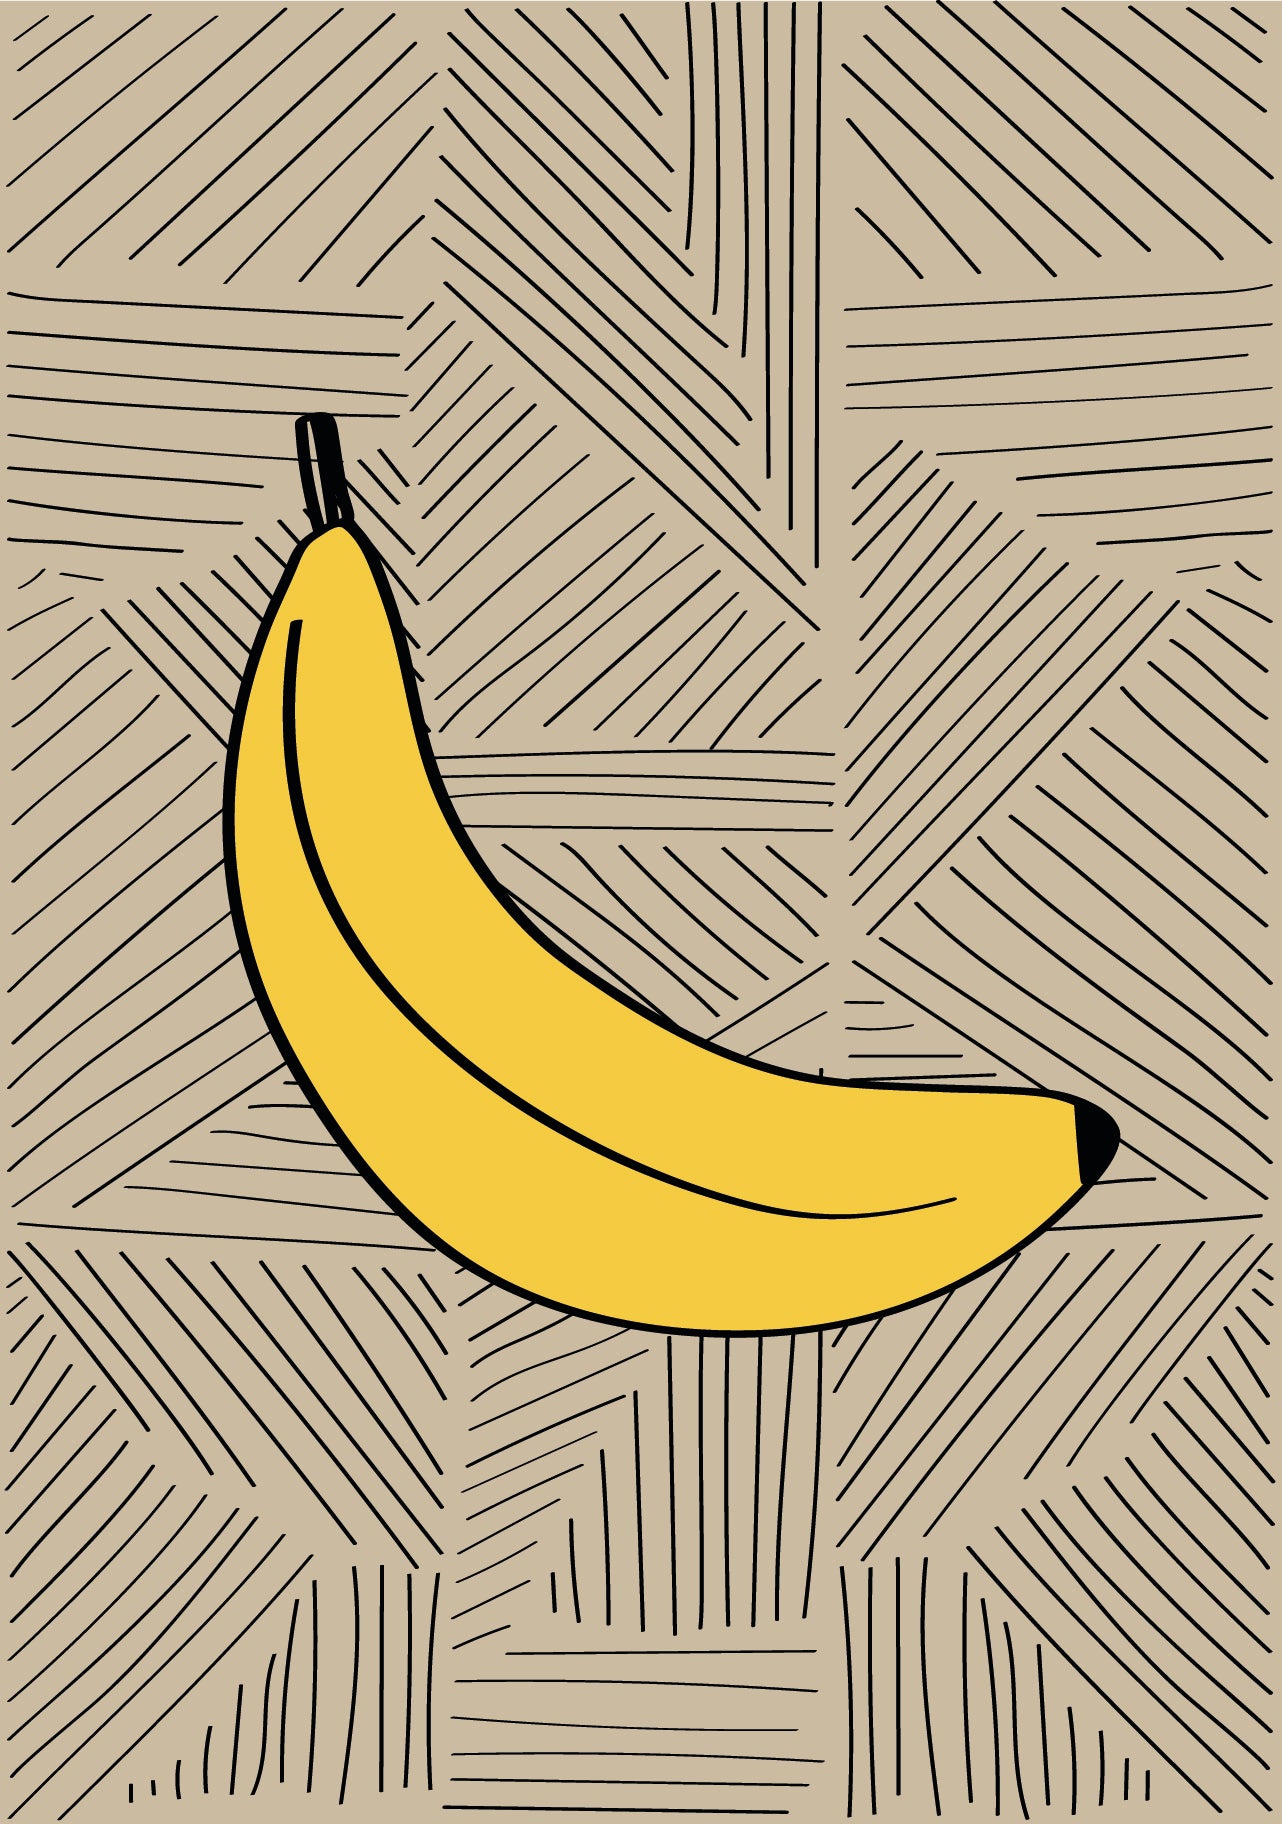 Greeting card with a drawing of a yellow banana on a light brown background with black lines on it and features tags such as banana, fruit, drawing, and food.